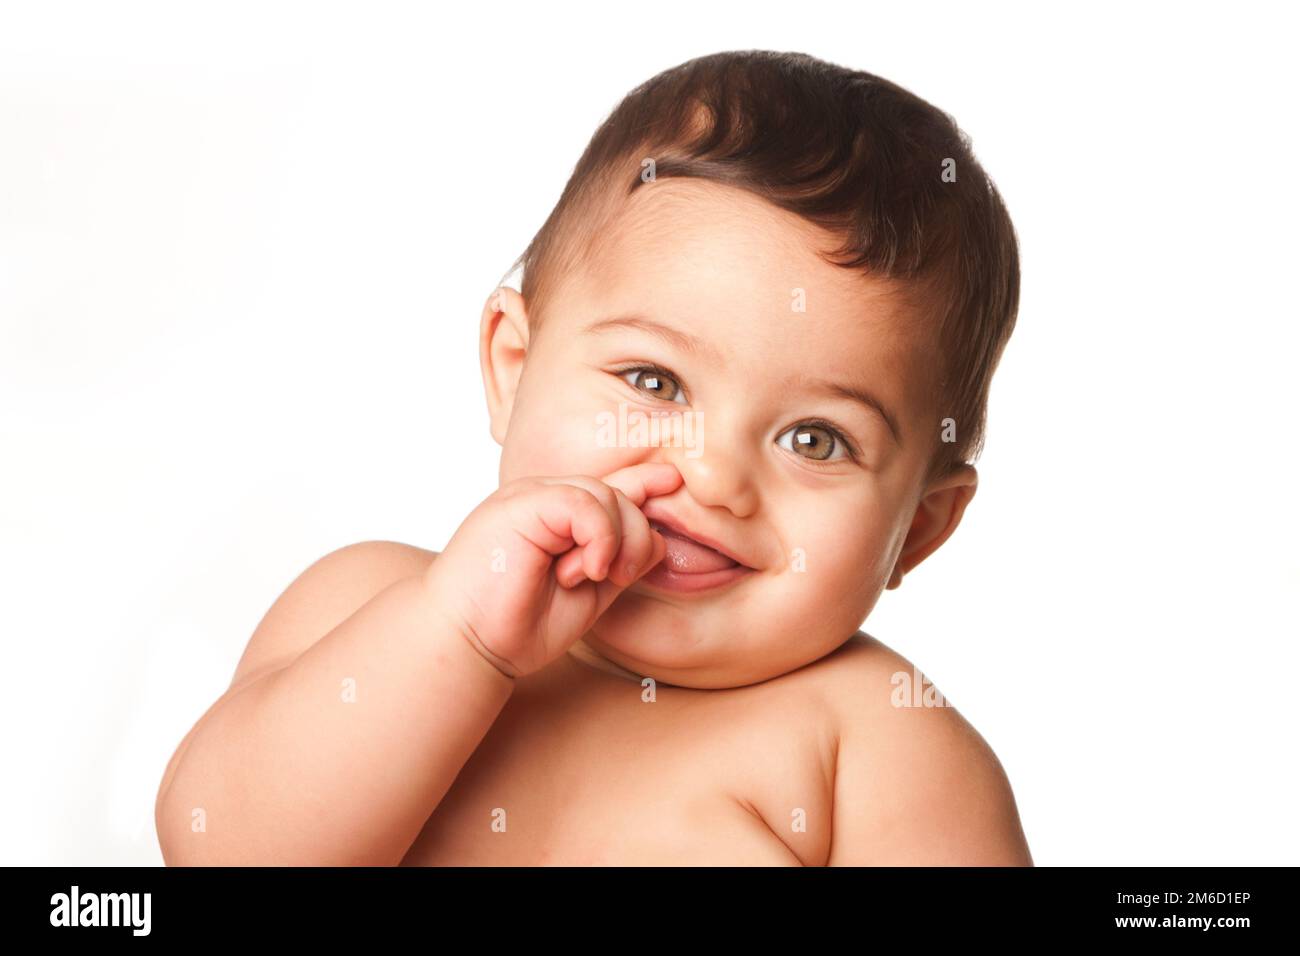 Cute baby infant with big green eyes picking nose on white Stock Photo